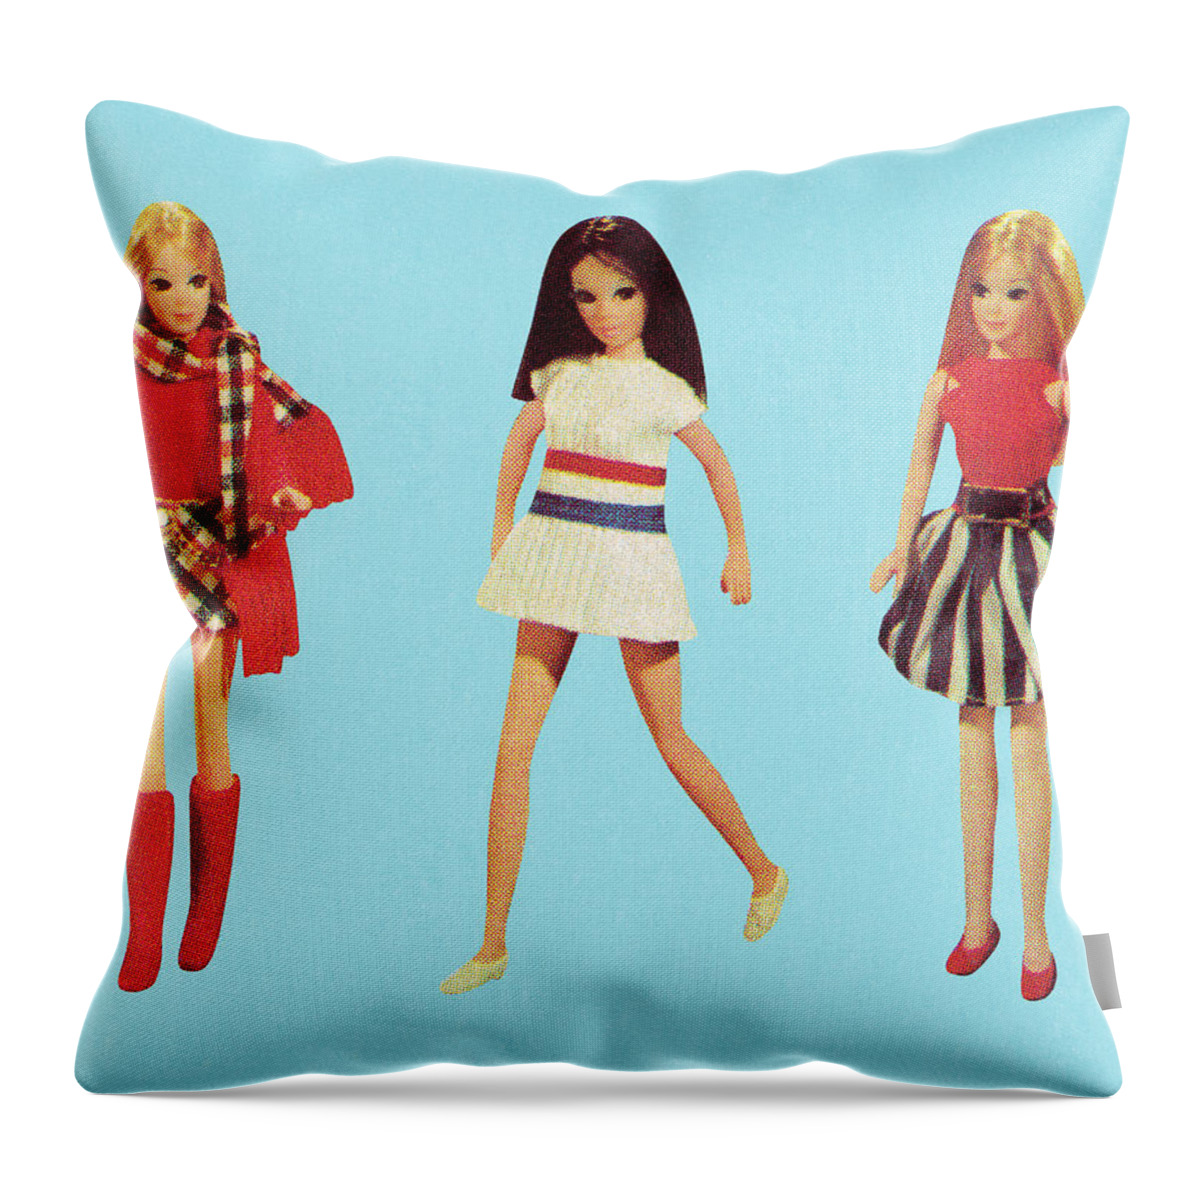 Apparel Throw Pillow featuring the drawing Two Blonde and One Brunette Fashion Dolls #1 by CSA Images